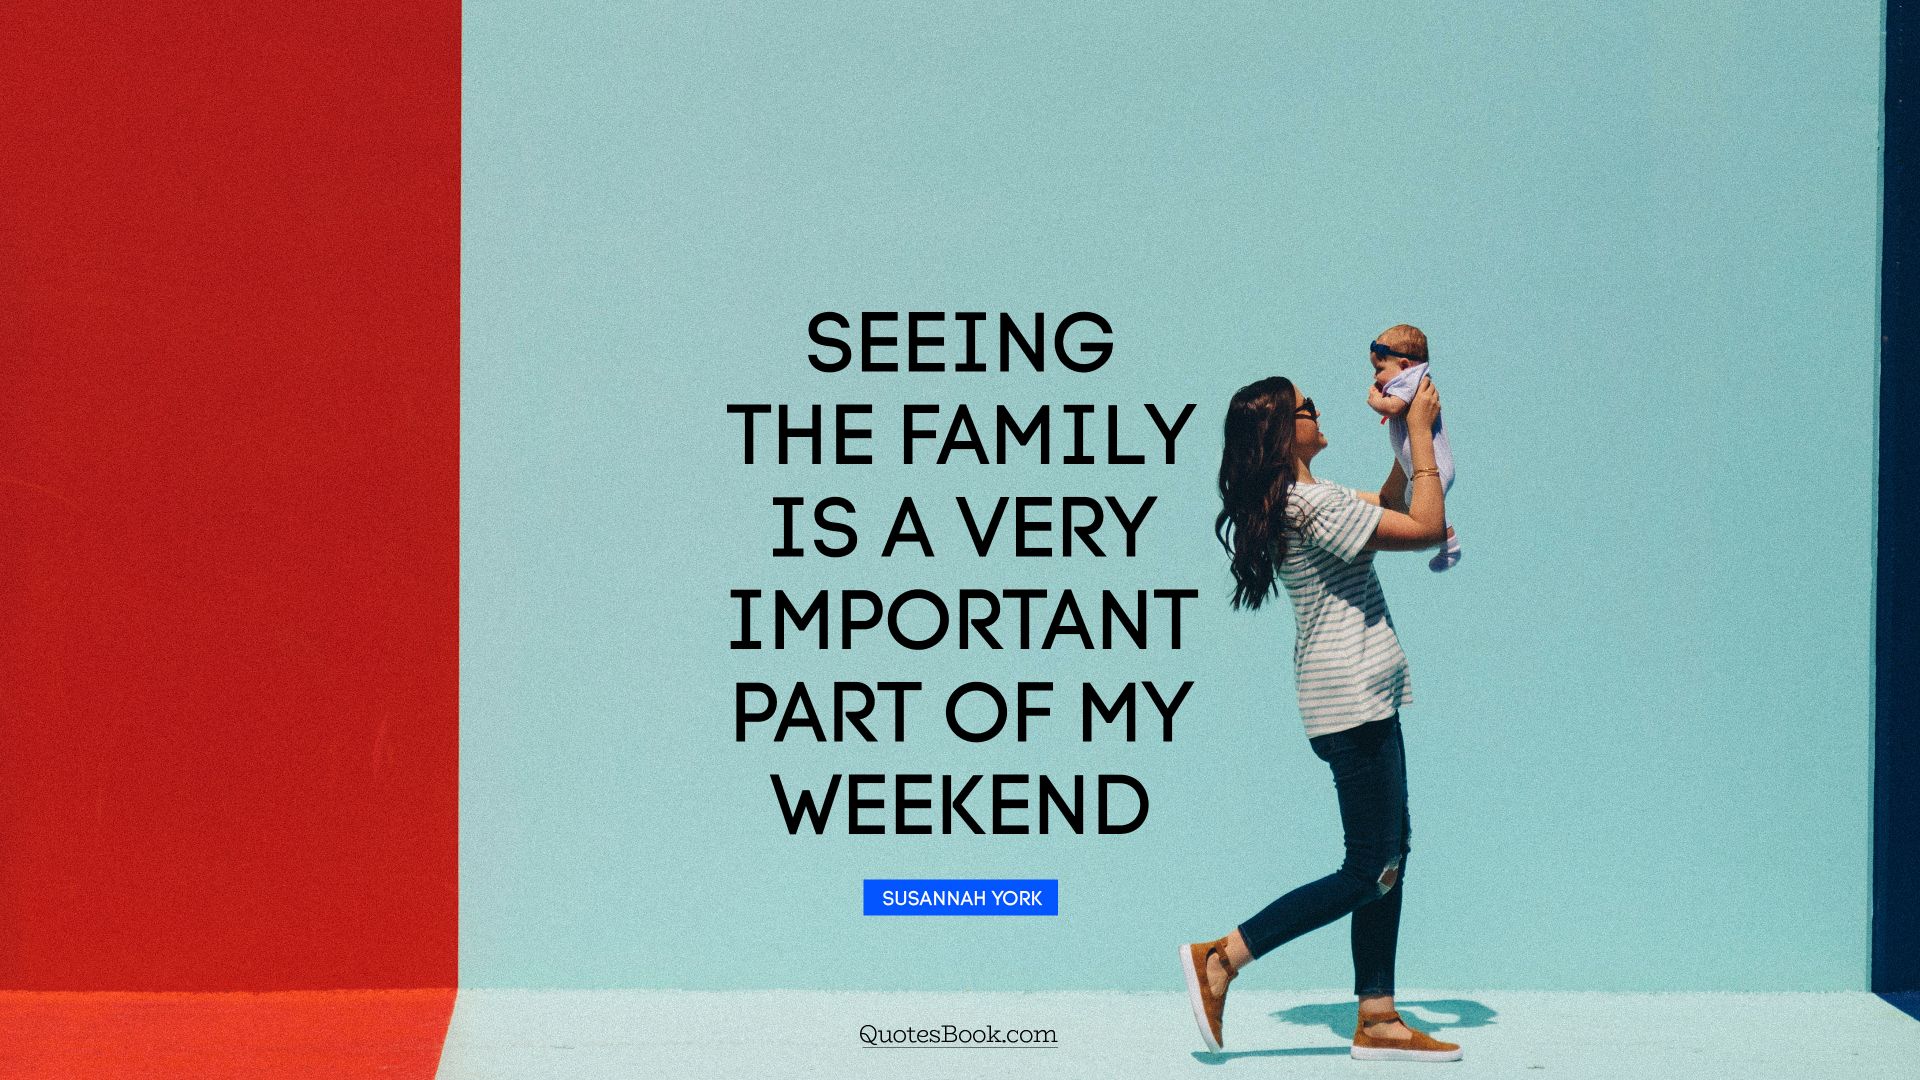 Seeing the family is a very important part of my weekend. - Quote by Susannah York